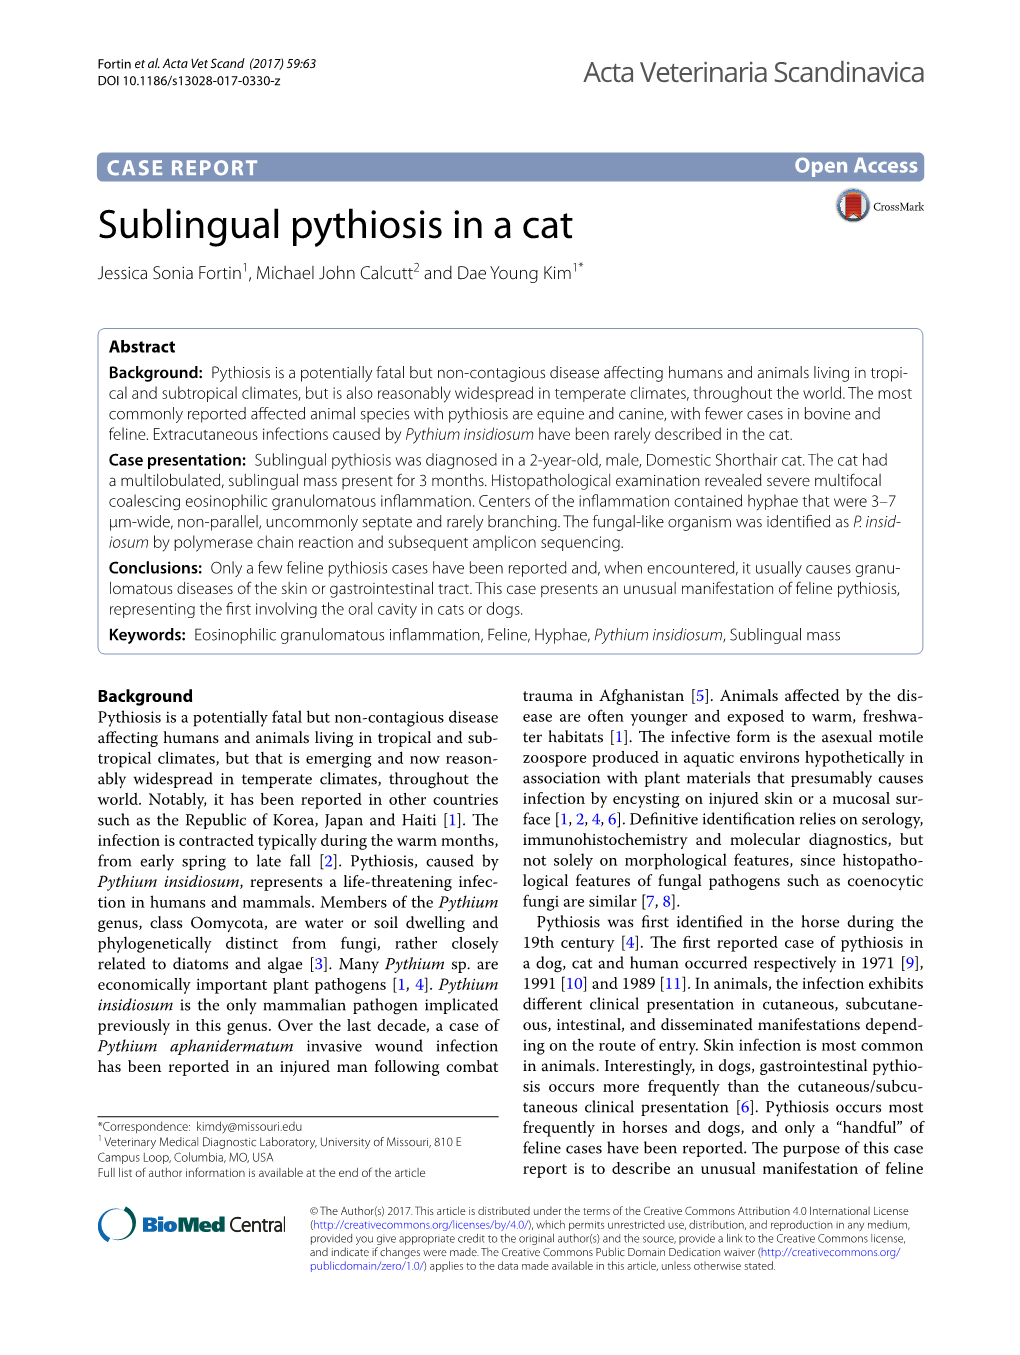 Sublingual Pythiosis in a Cat Jessica Sonia Fortin1, Michael John Calcutt2 and Dae Young Kim1*